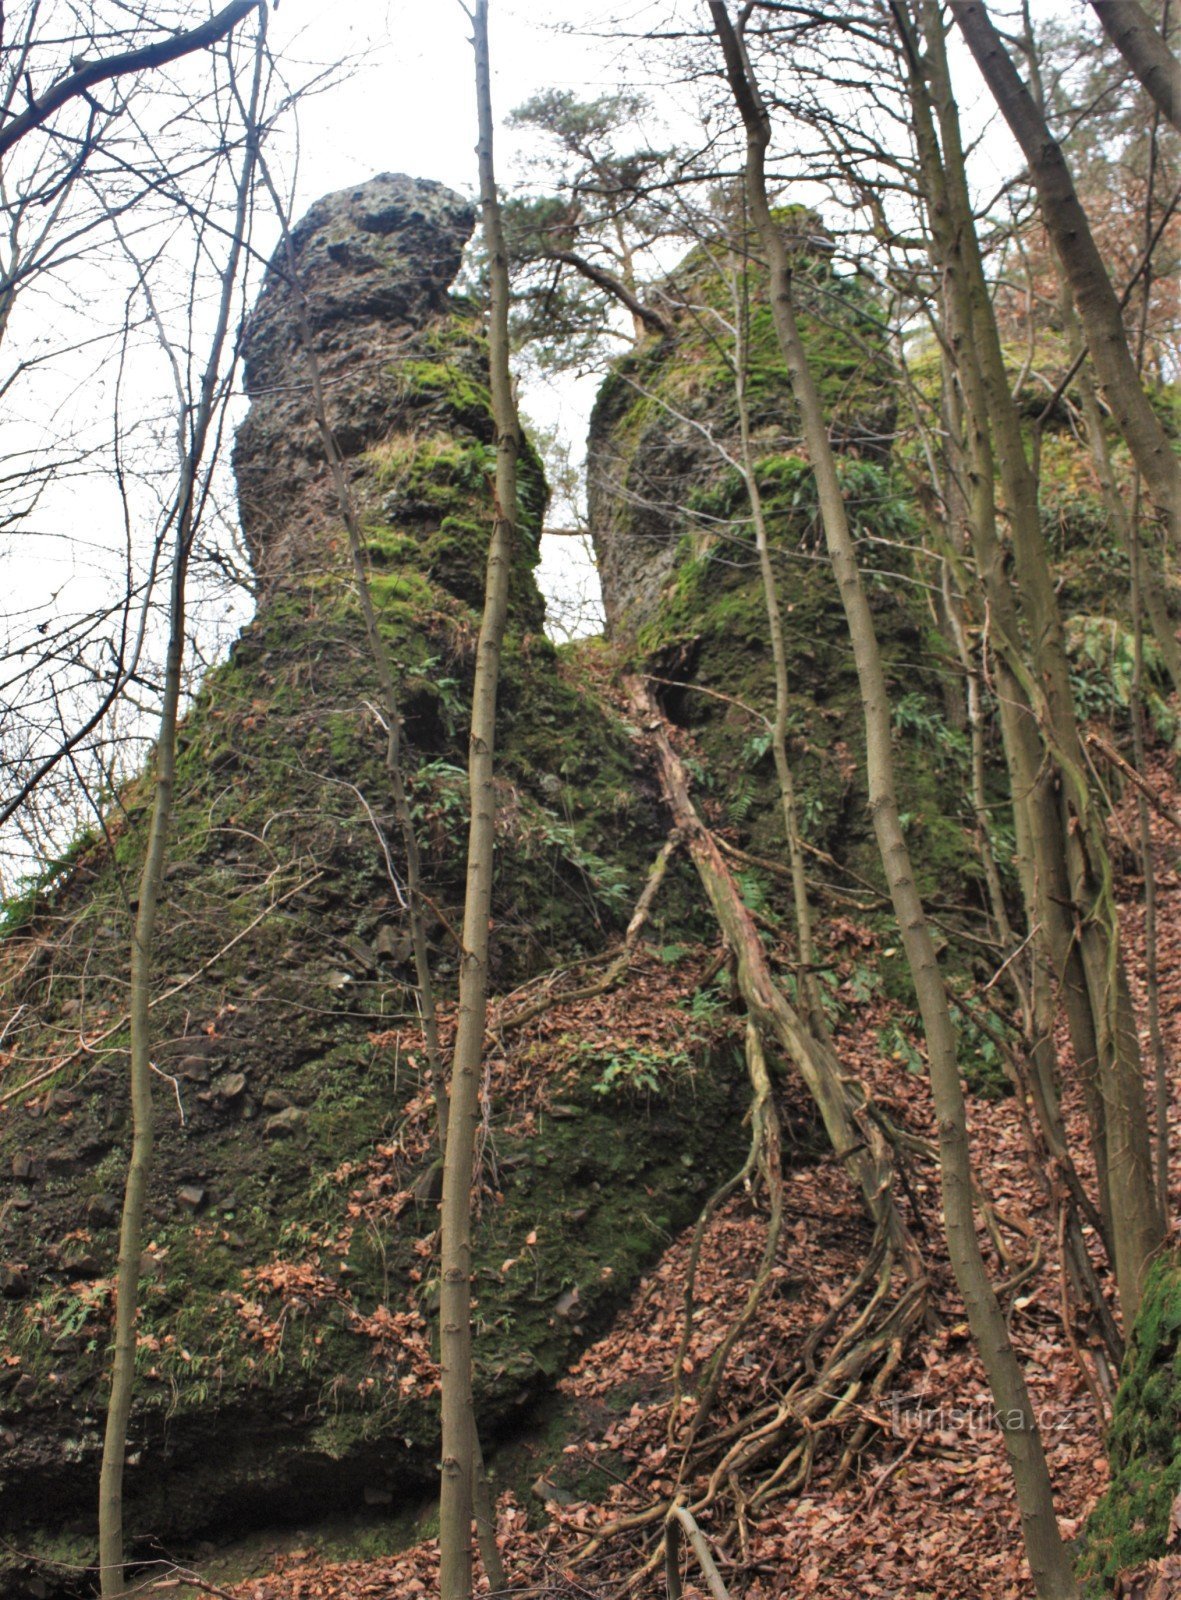 Other rock formations on the slope of the valley near Krkatá báby